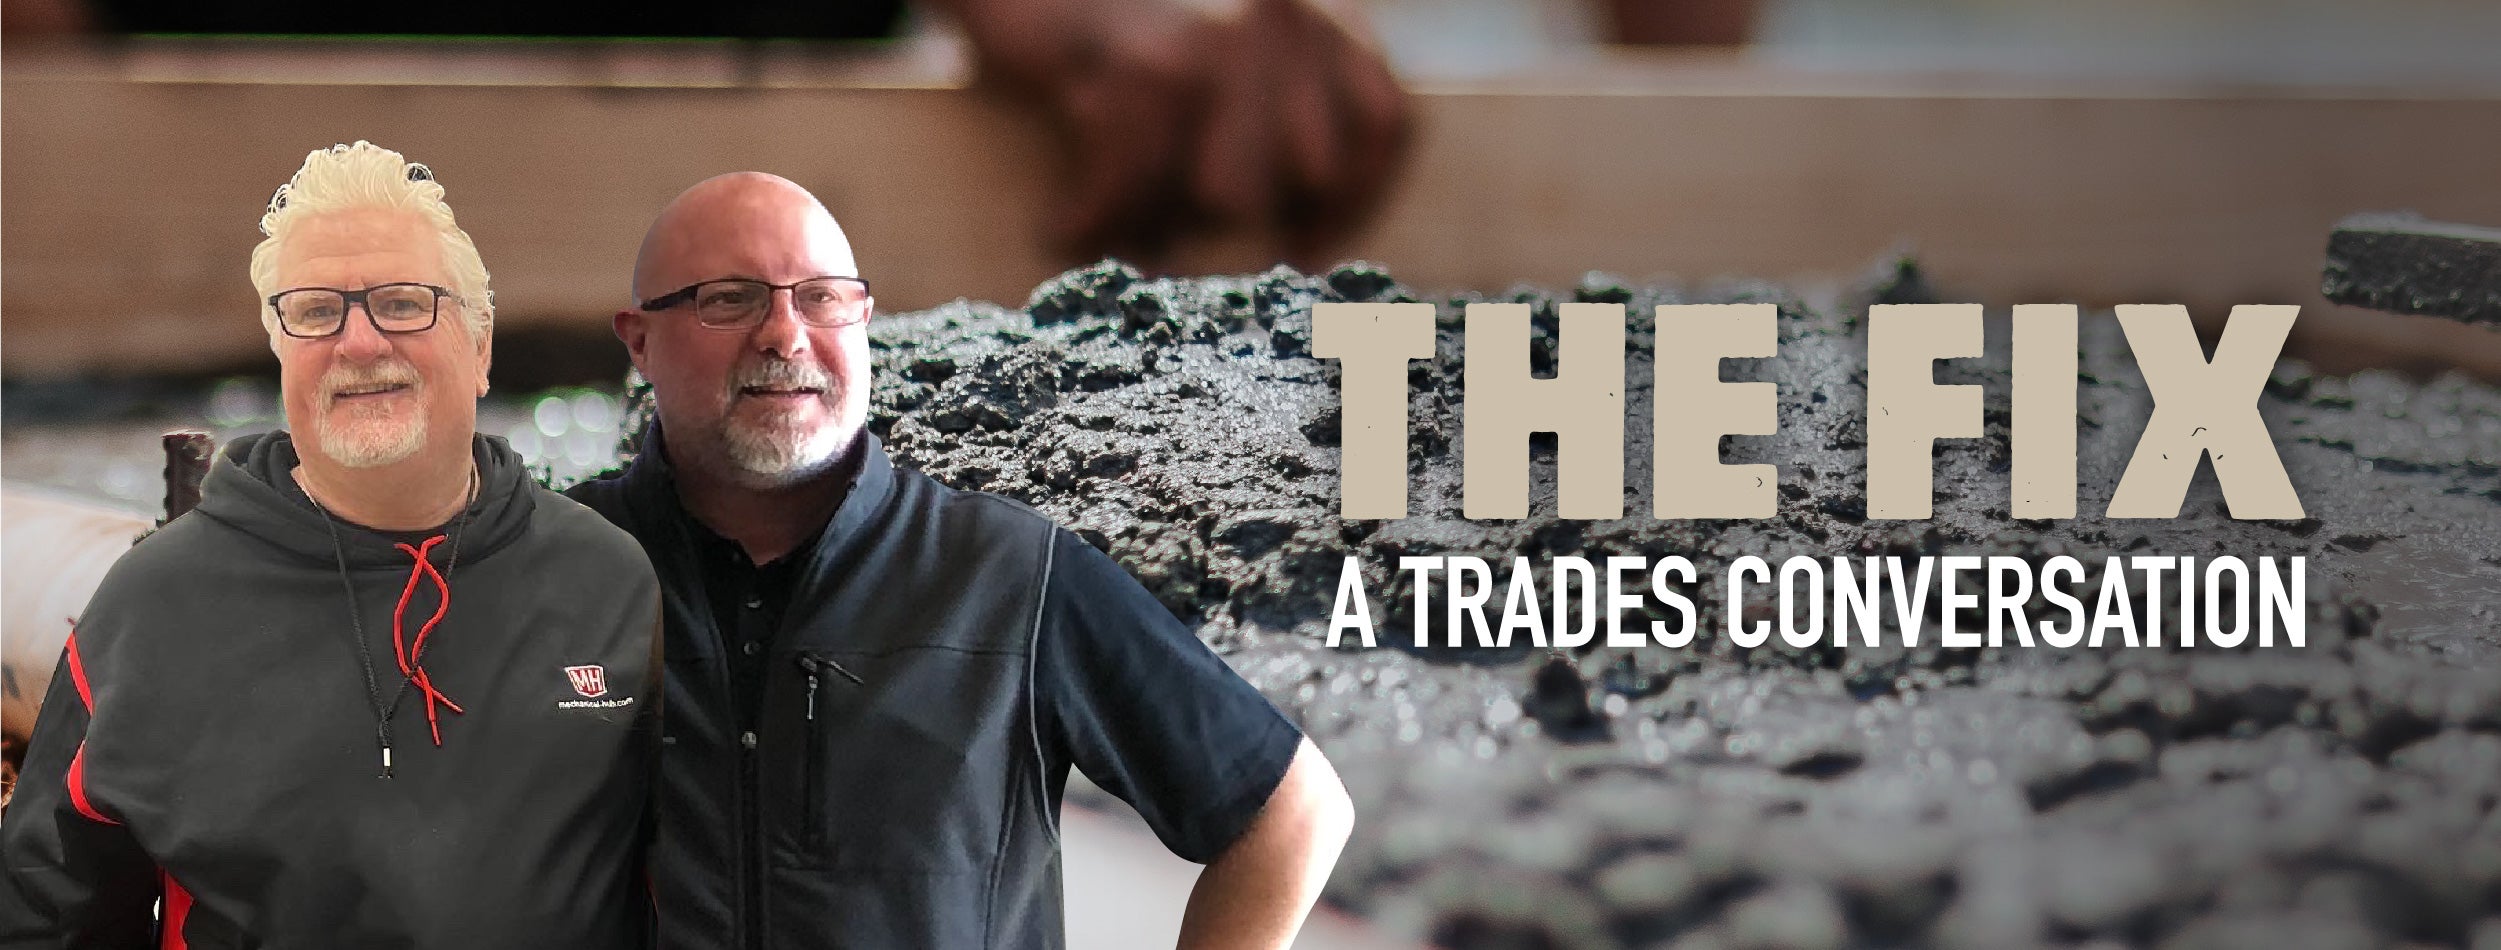 “Not Your Grandfather’s Plumbing” | How Mechanical Hub is Evolving Trade Media